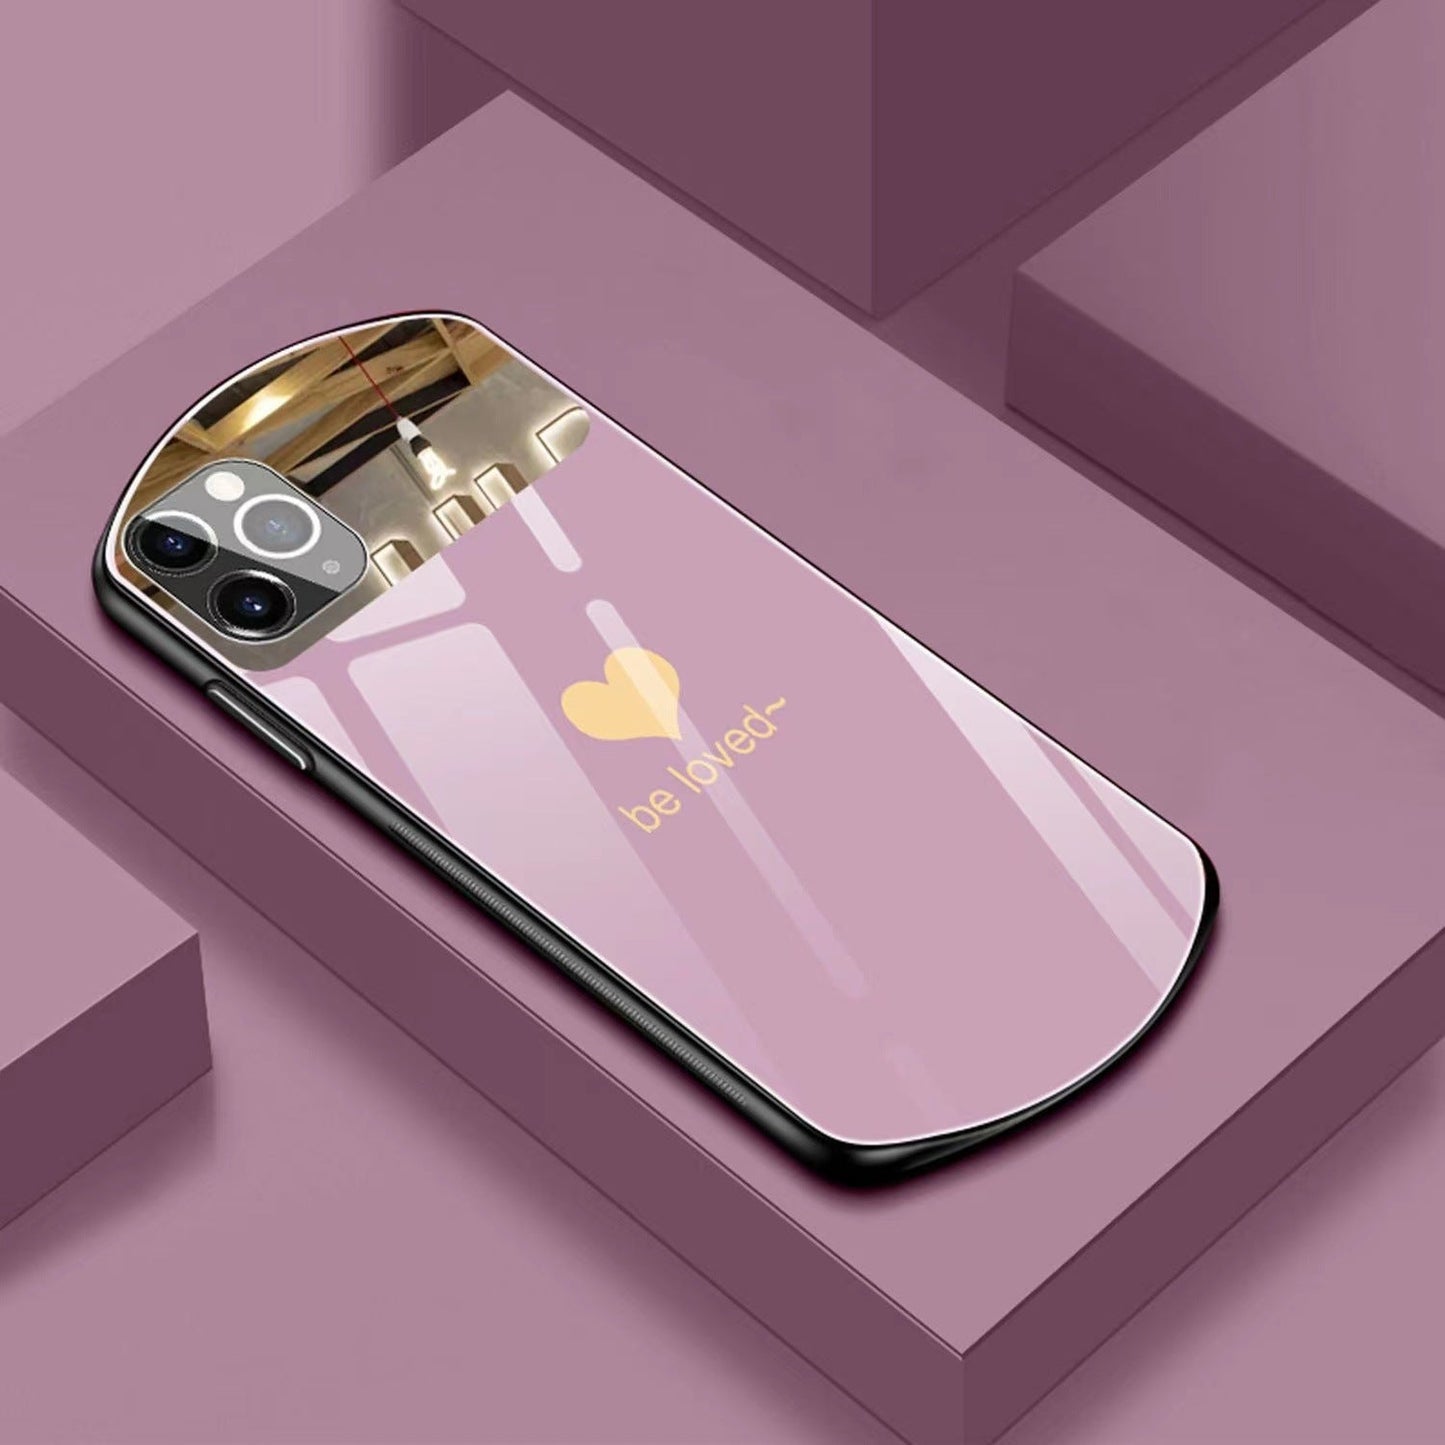 Heart-Shaped Oval Tempered Glass iPhone Case